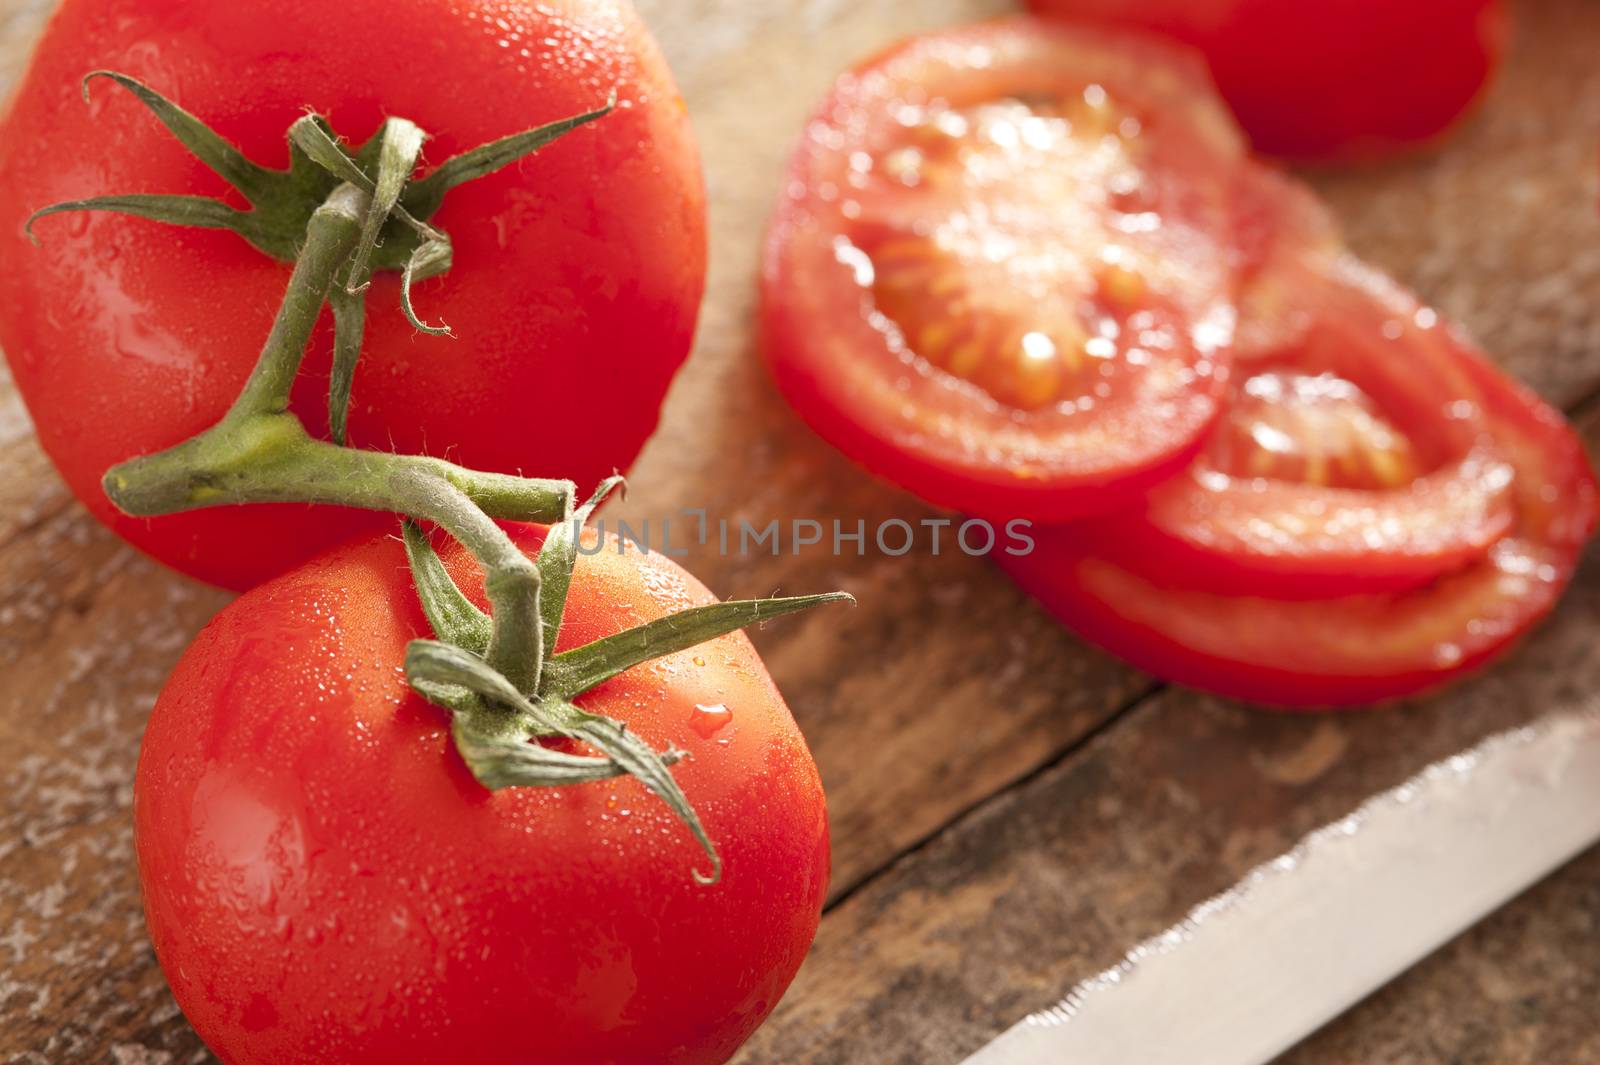 Fresh washed tomatoes with droplets of water on the vine and sliced ready for inclusion in a healthy summer salad on a wooden board with knife